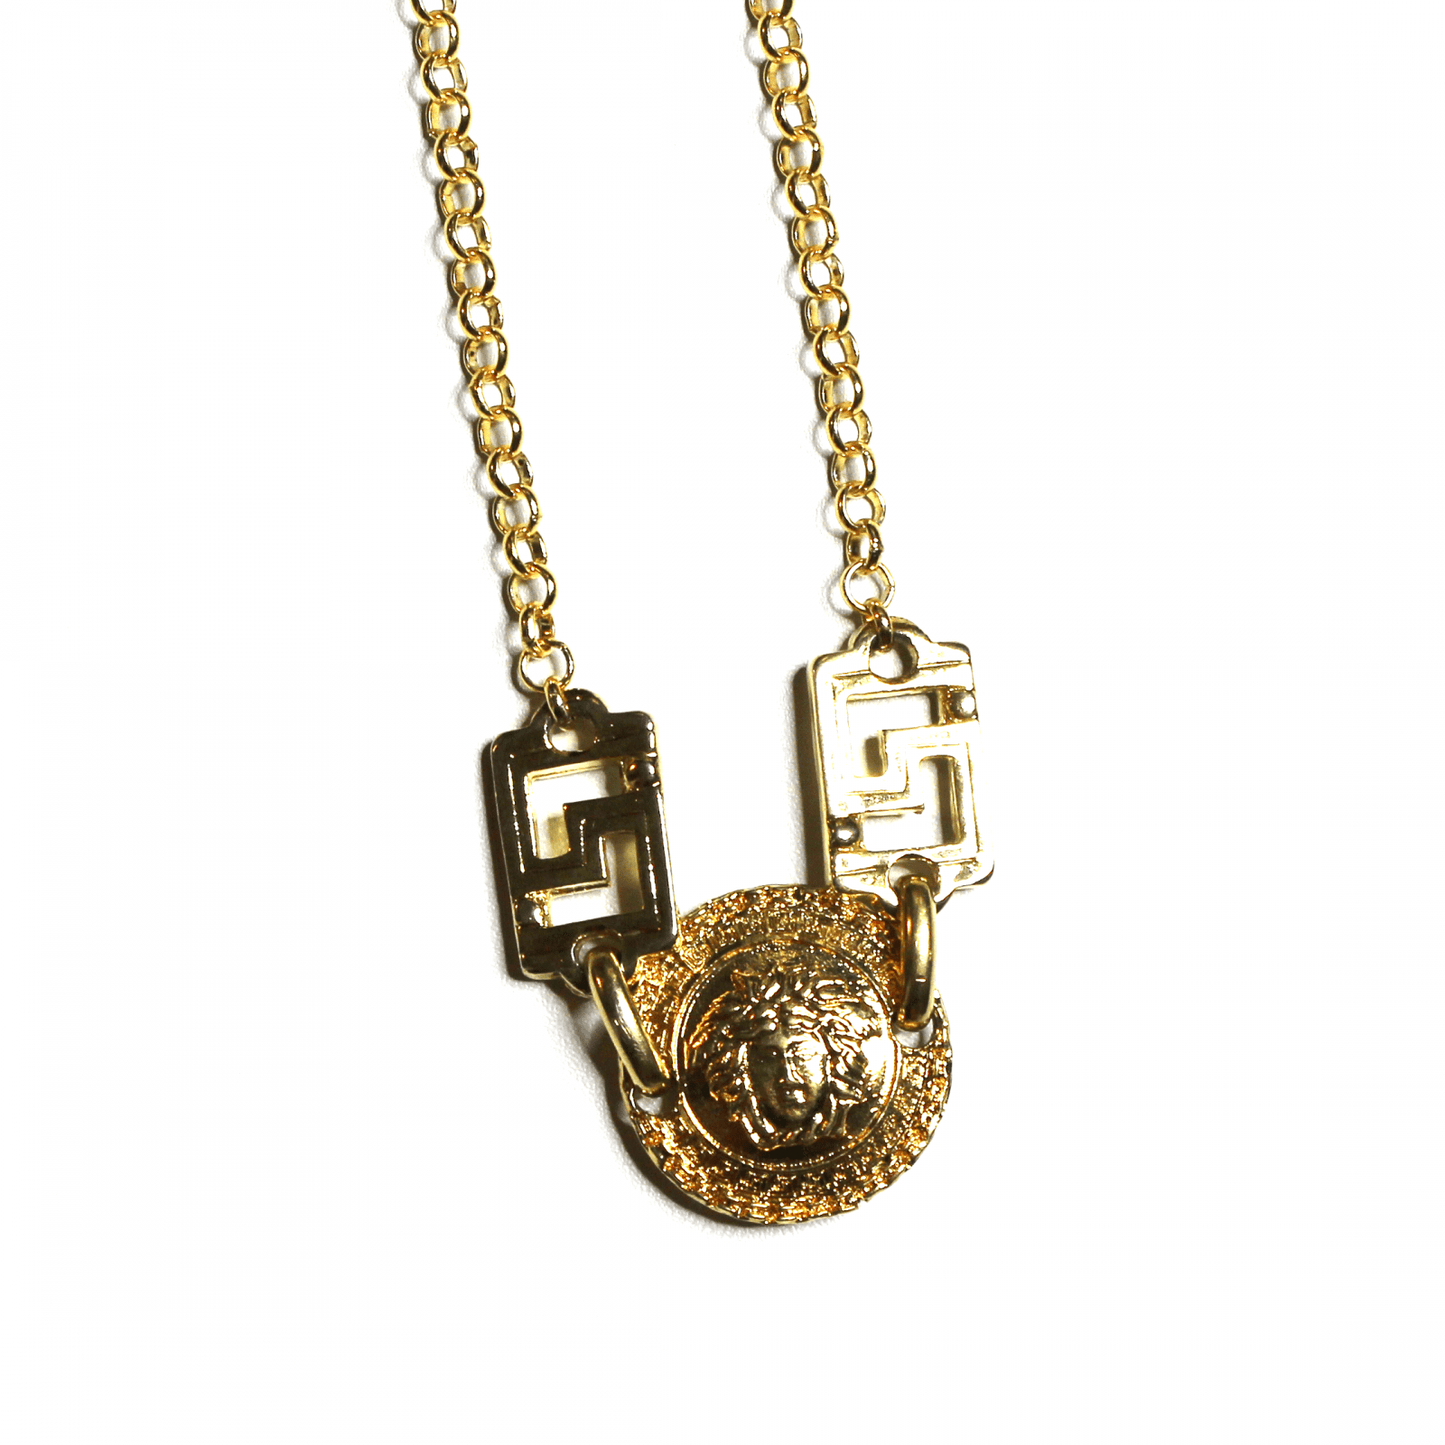 Large Gold Gianni Versace Single Sided Medusa Head Coin Chain with Greek Key Accents RSTKD Vintage